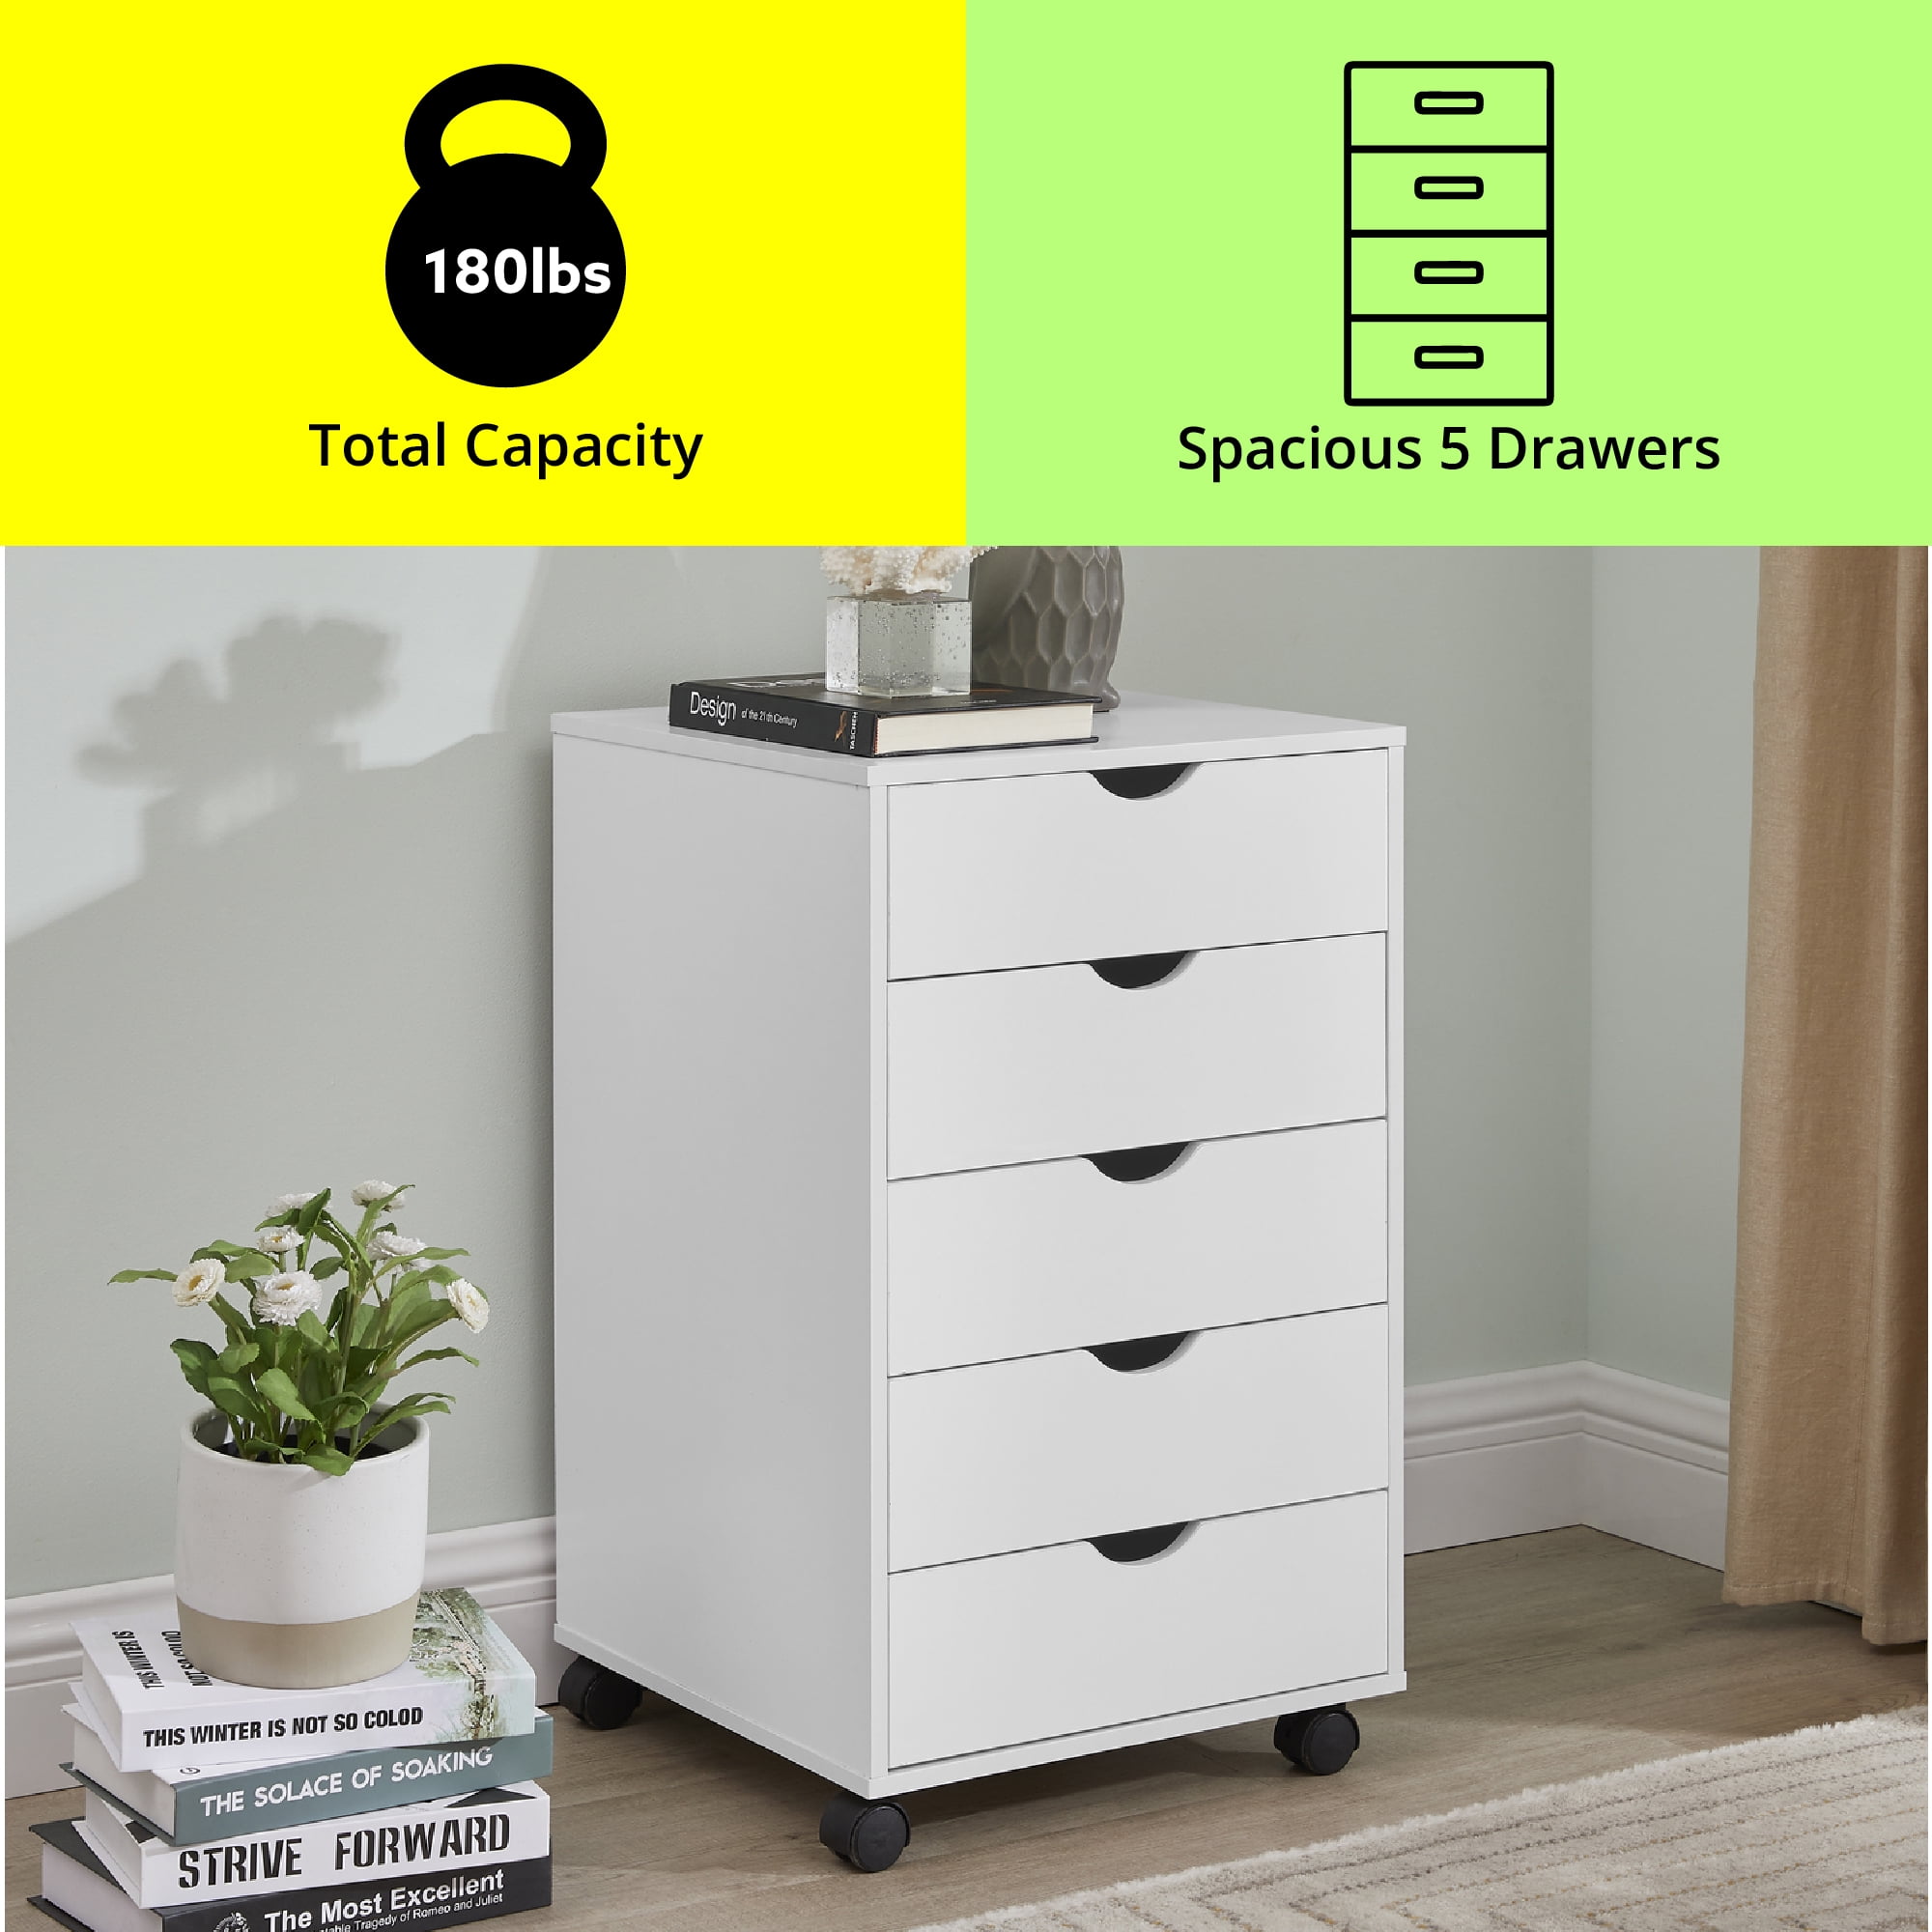 Details about   3 Drawers Home Storage Cabinet Dressers Tower Wood Top Removable Steel Brown 